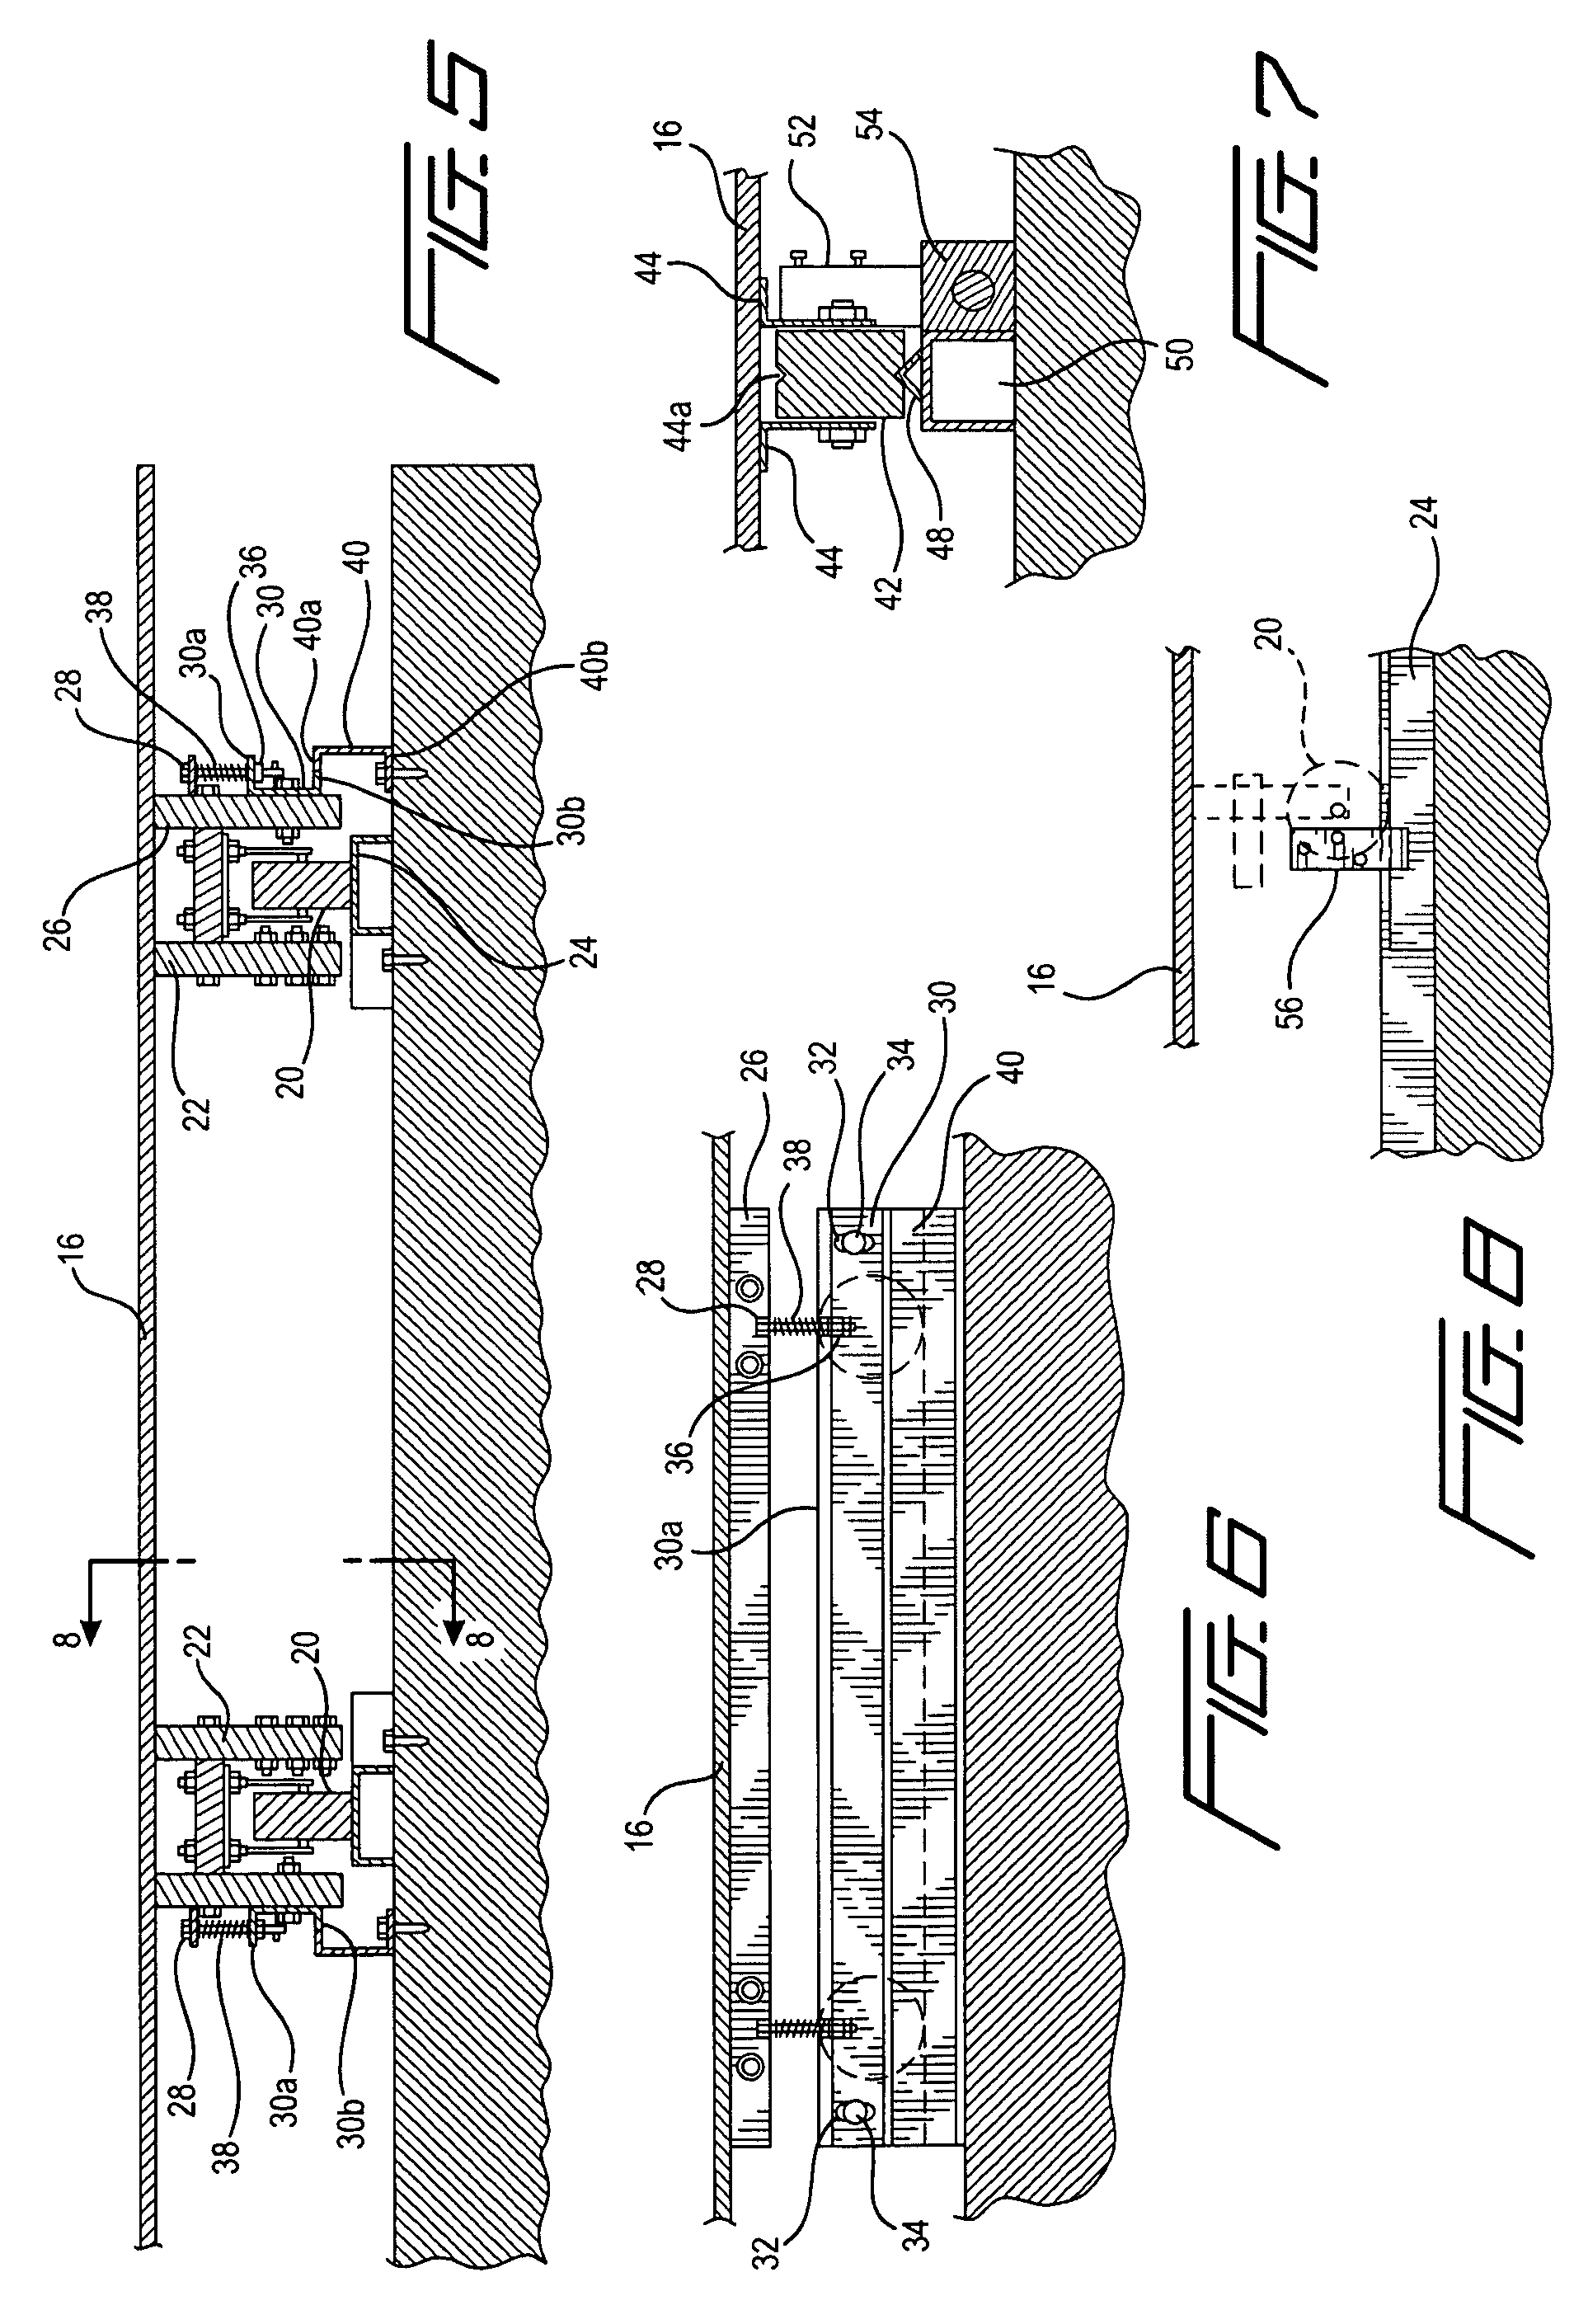 Flat railcar work platform and wheel assembly with locking mechanism